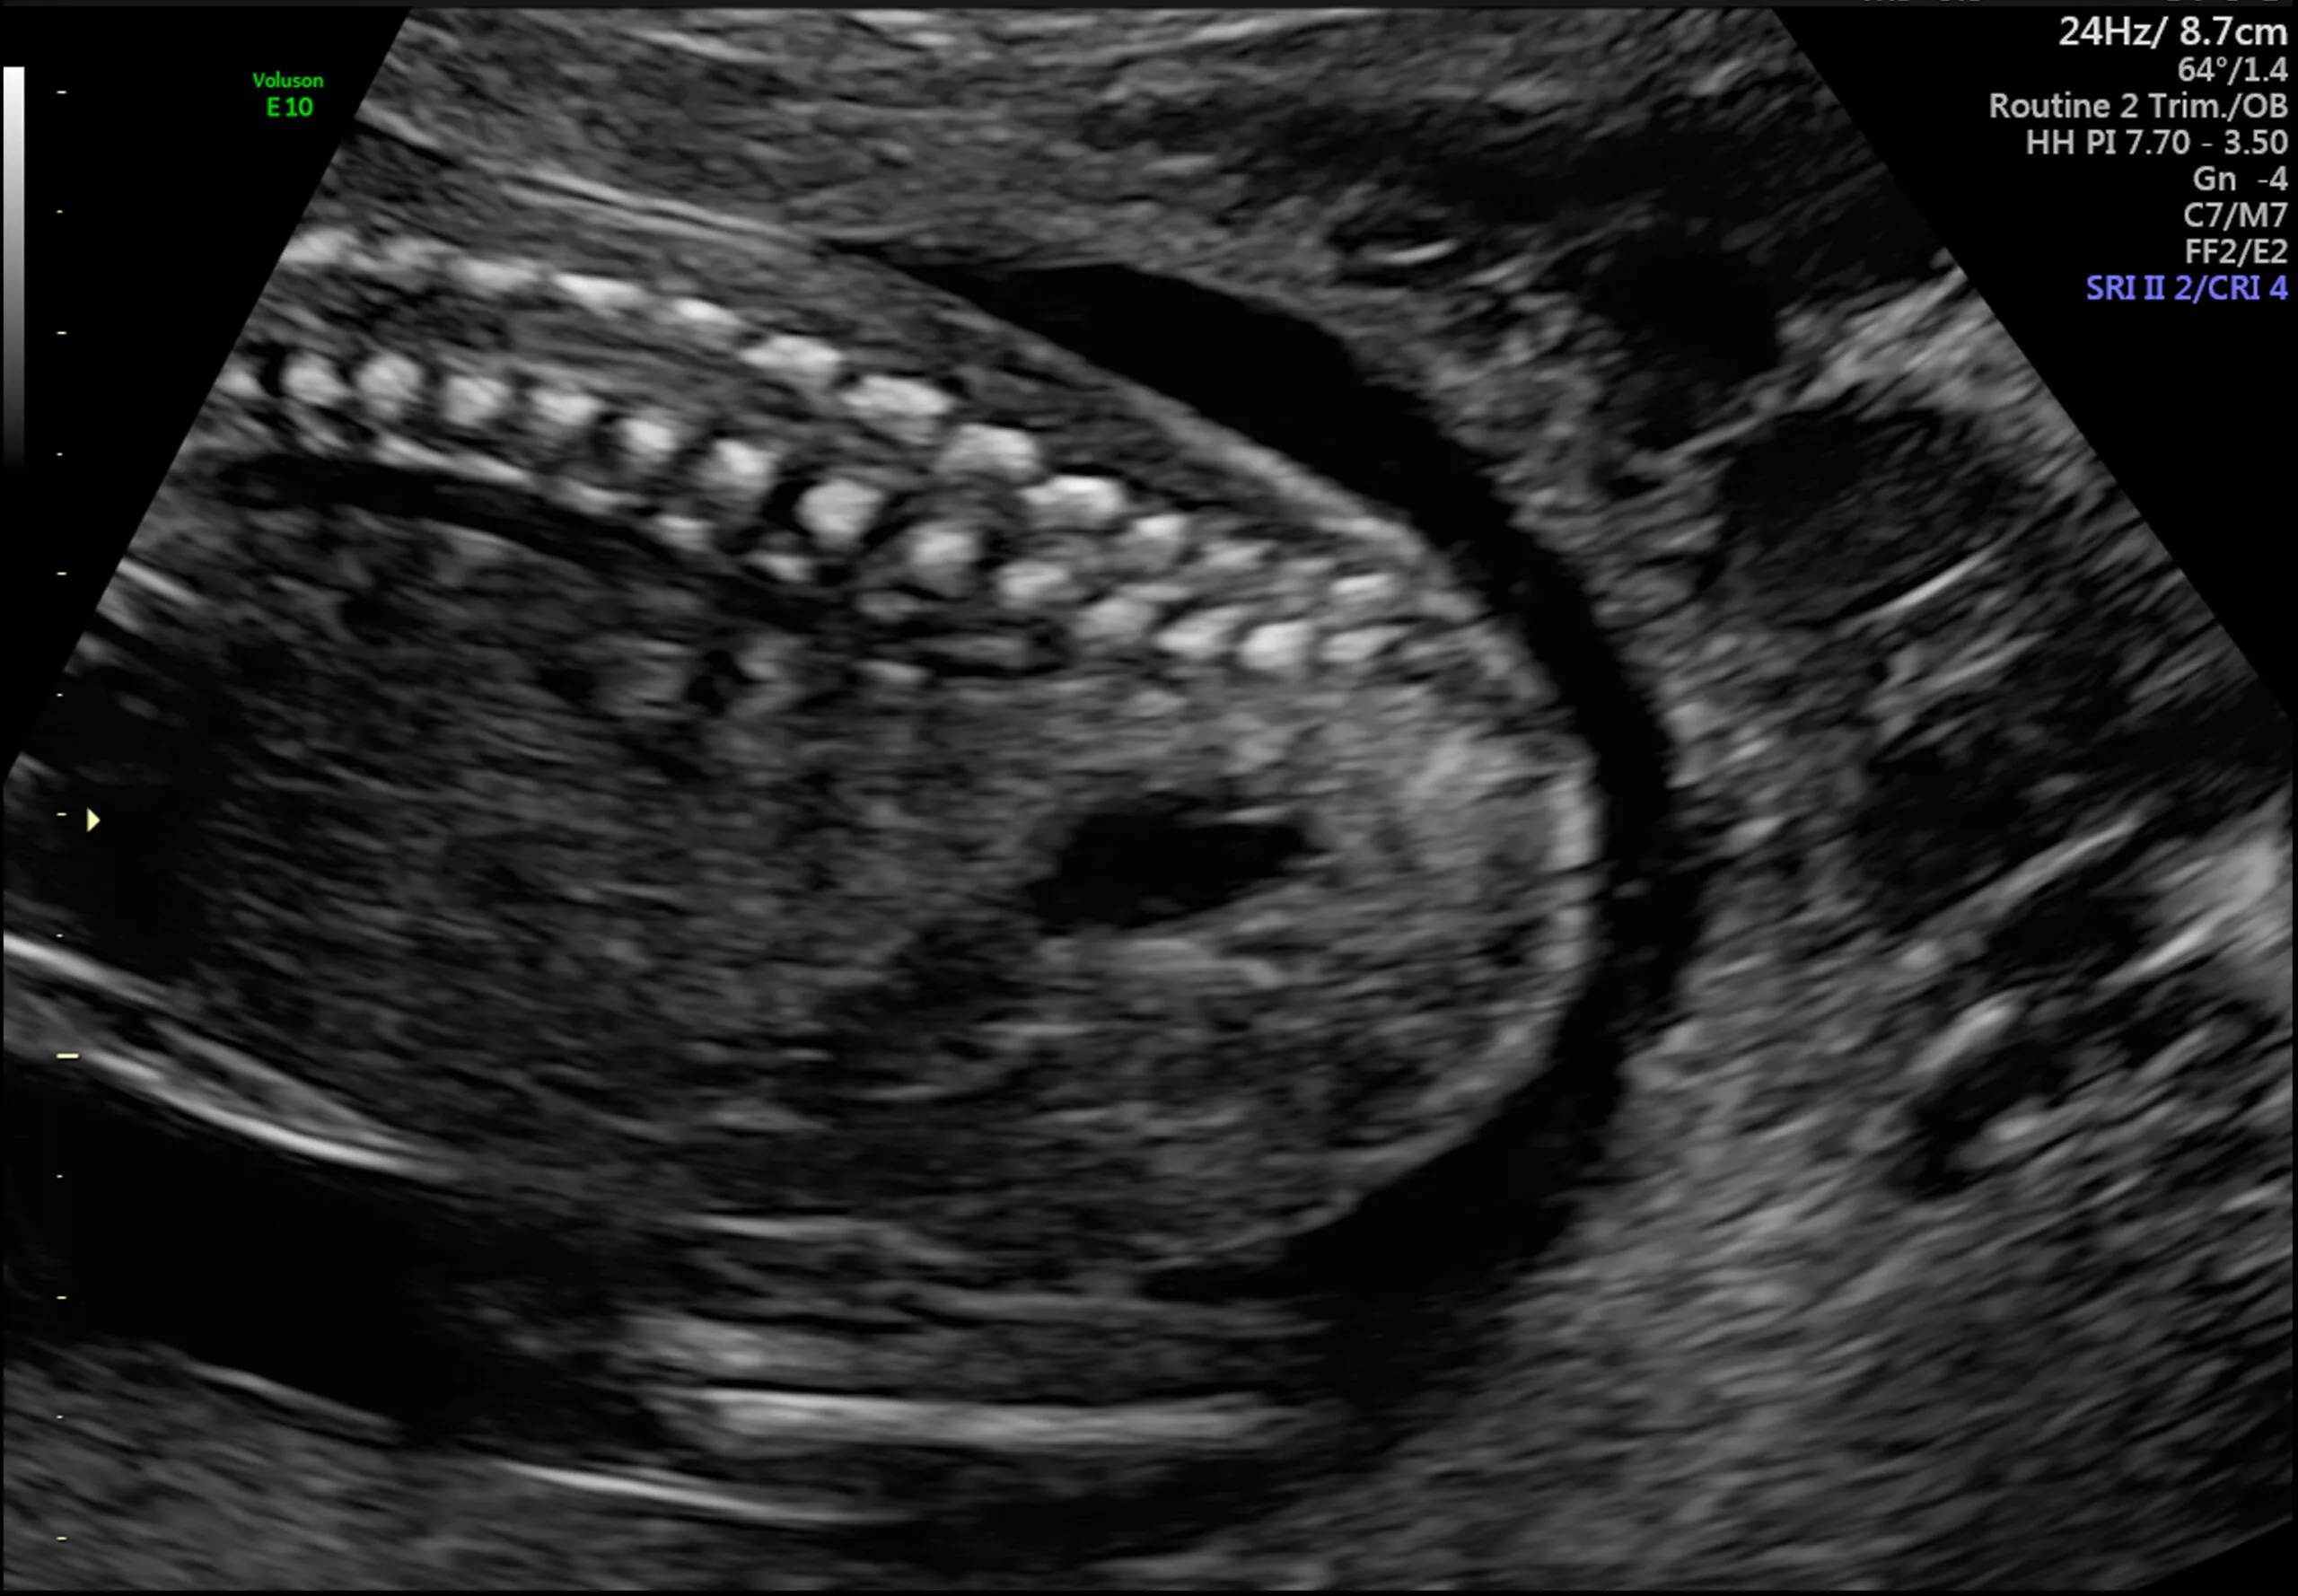 Safety Ultrasound During Pregnancy - USC